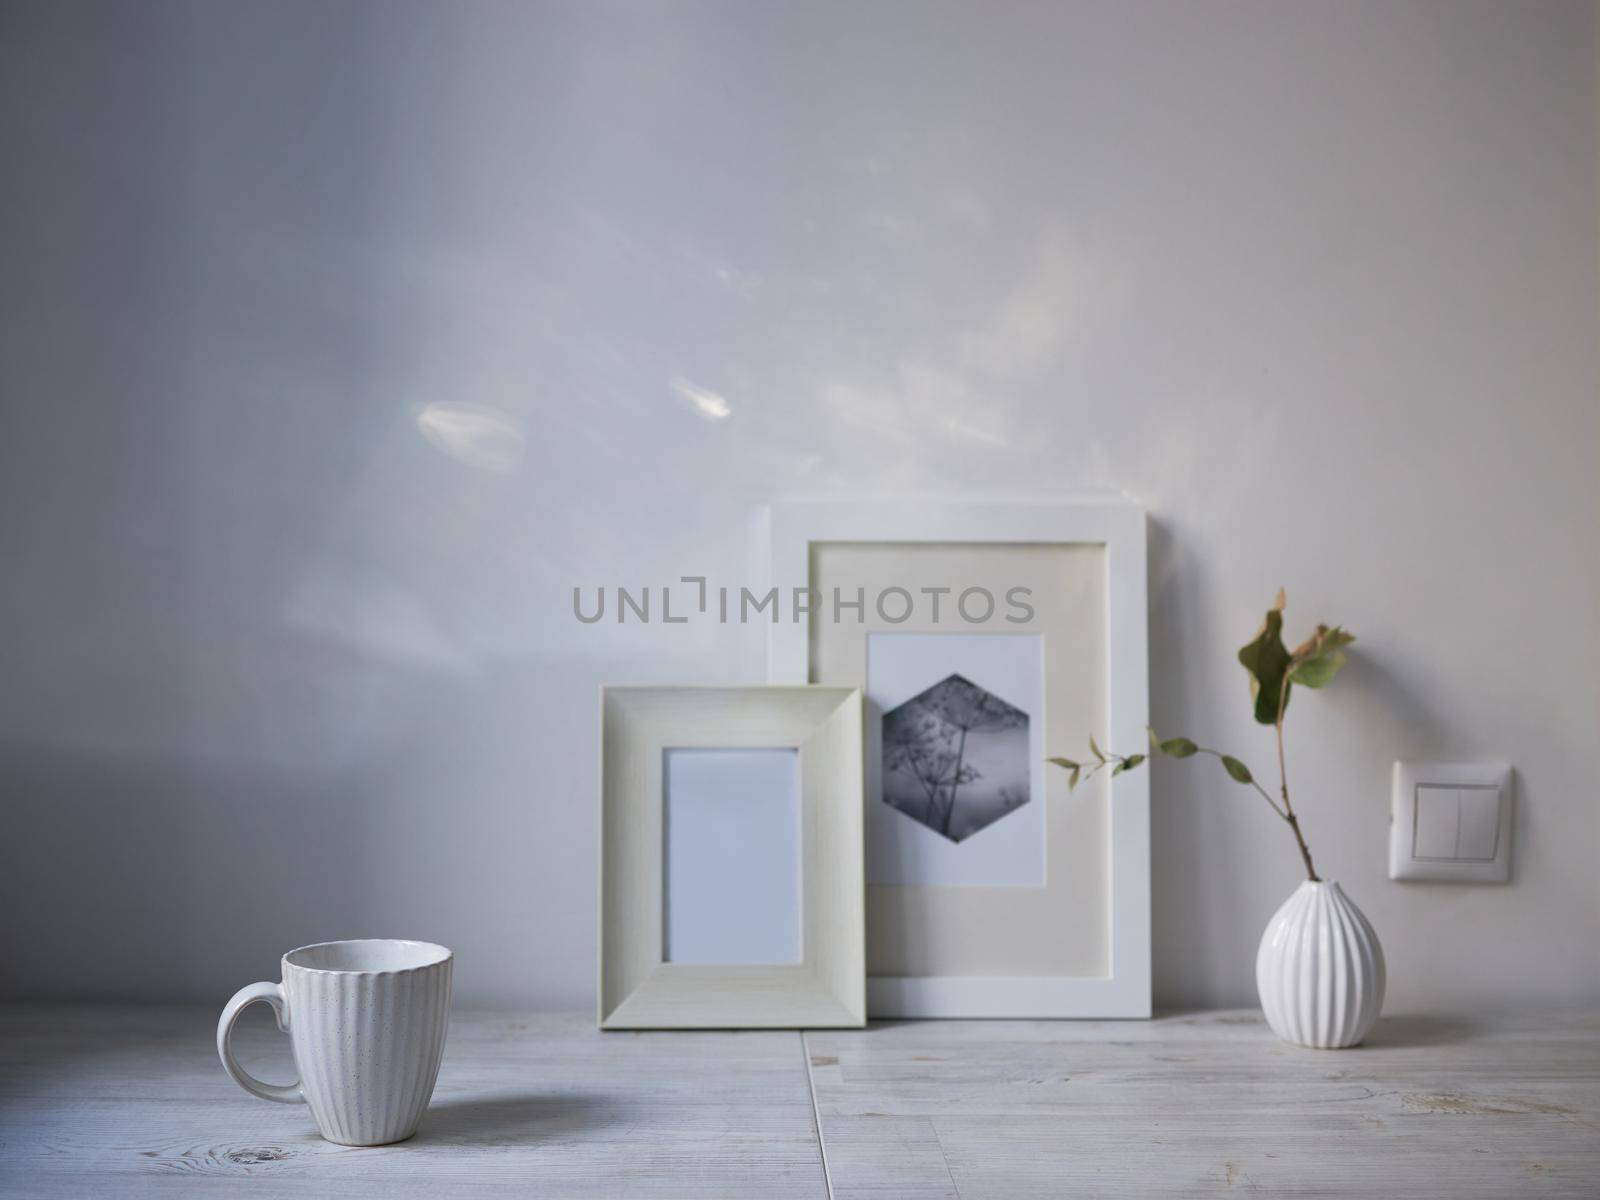 Scandinavian style. Interior Design. A white cup, a small vase with a dried eucalyptus branch, a two photo frames are on the table. Copy space for text